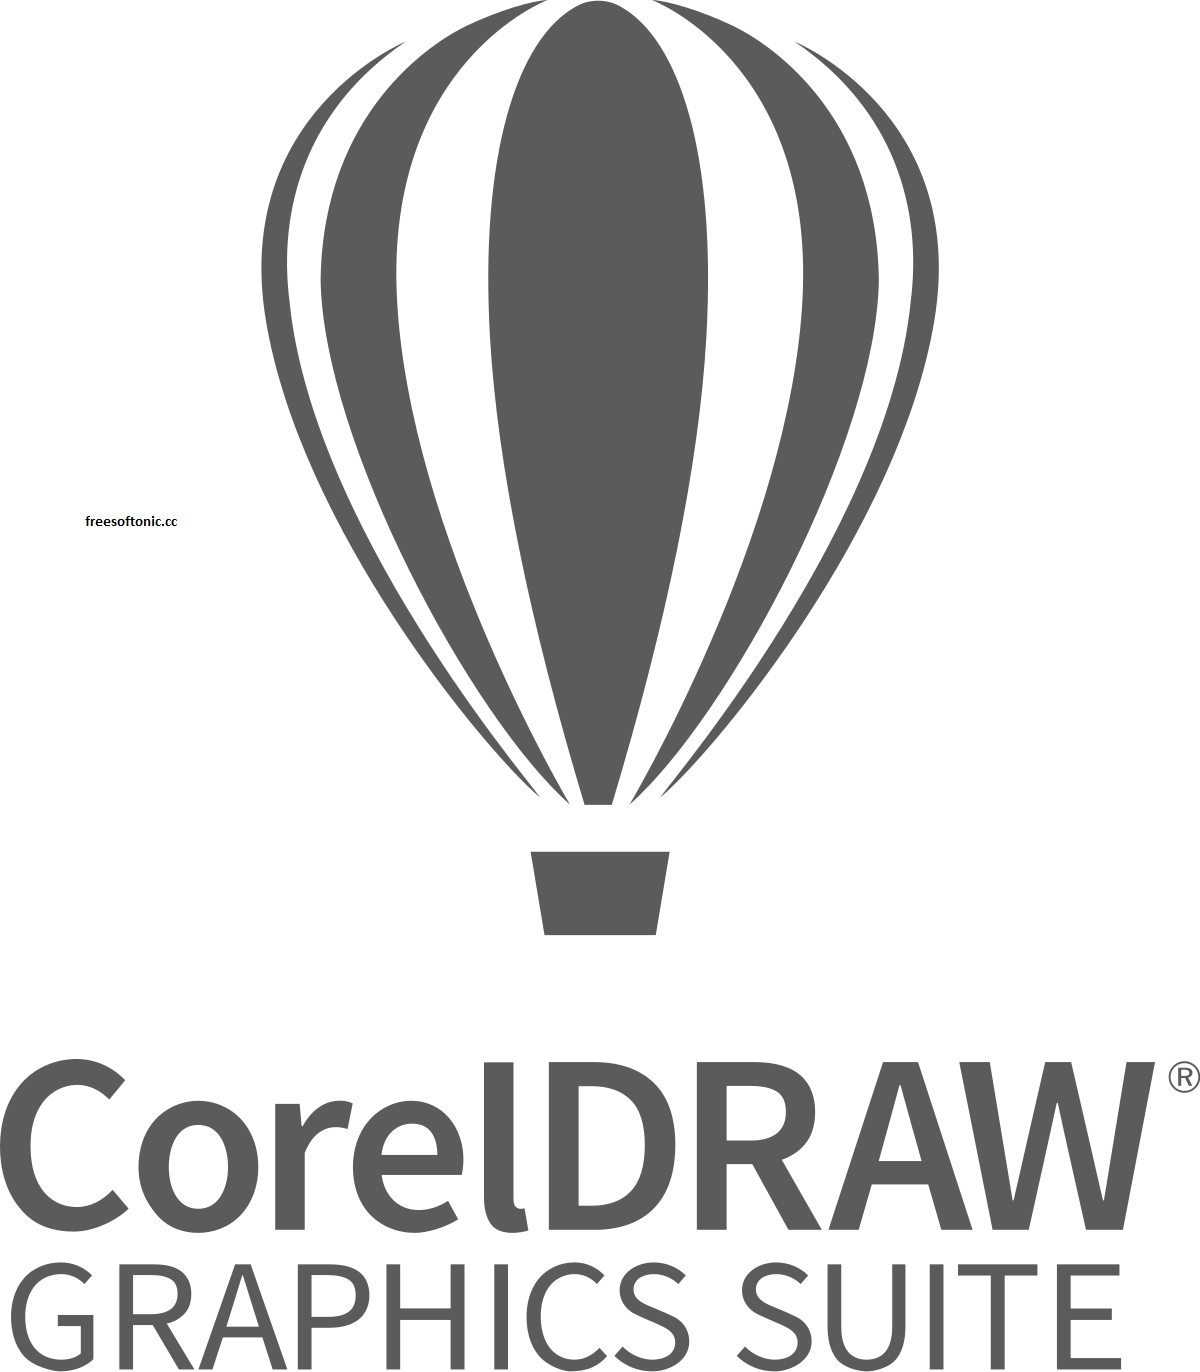 coreldraw old version free download with crack